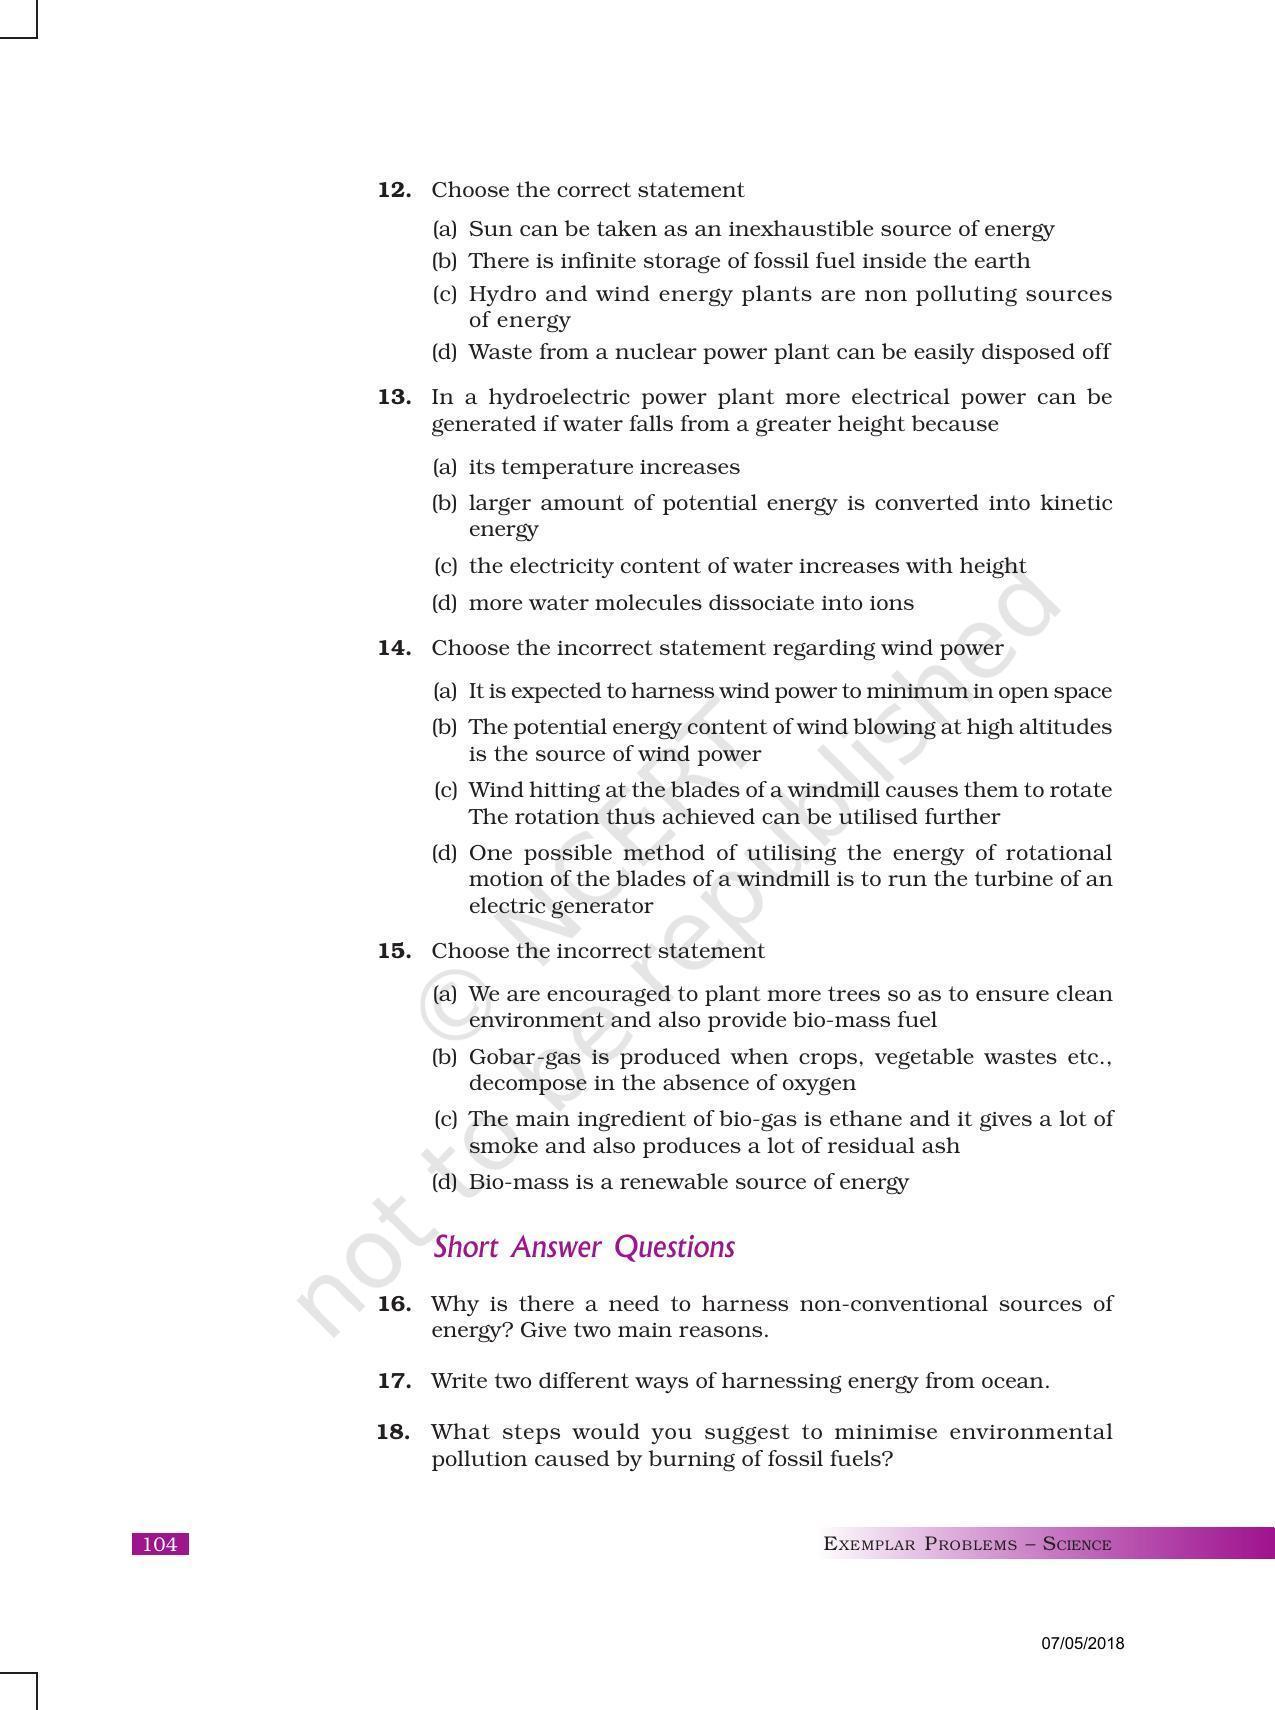 NCERT Exemplar Book for Class 10 Science: Chapter 14 Sources of Energy - Page 3